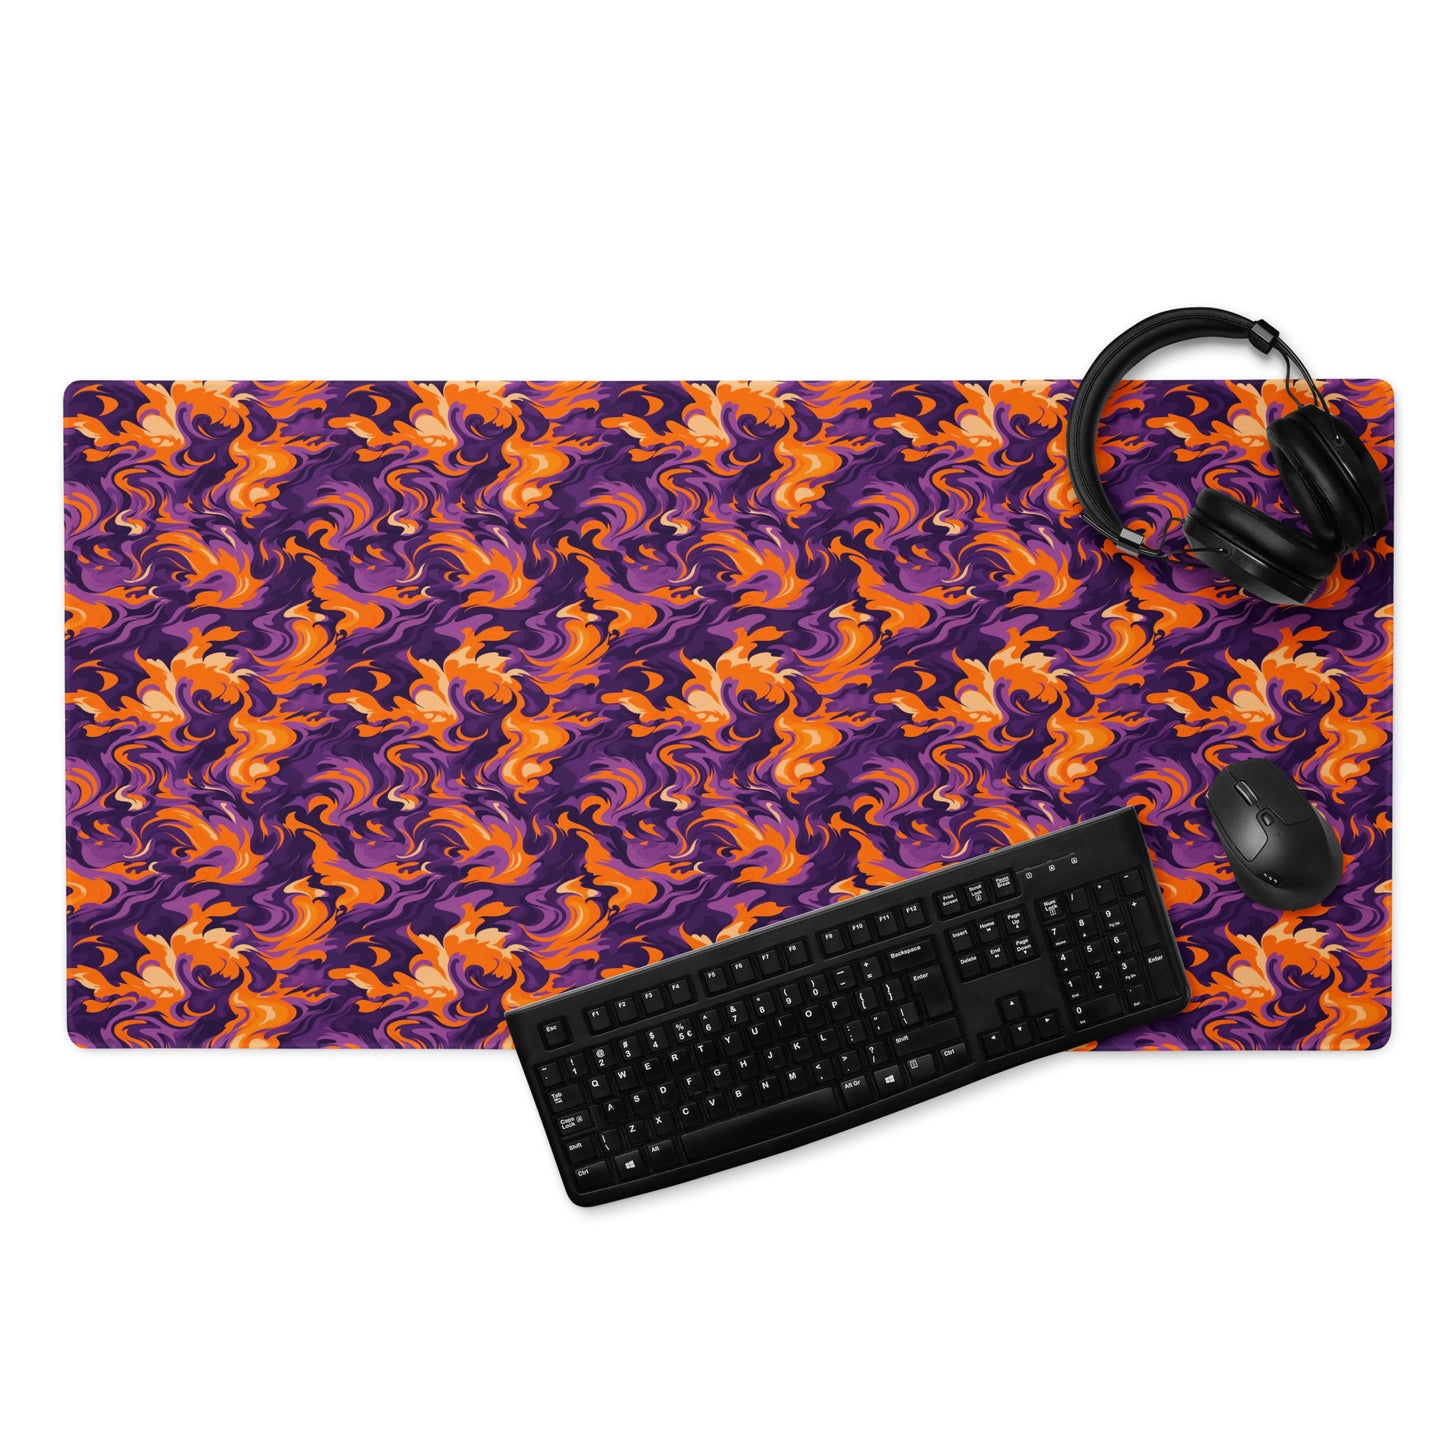 A 36" x 18" desk pad with a purple and orange camo pattern. With a keyboard, mouse, and headphones sitting on it.